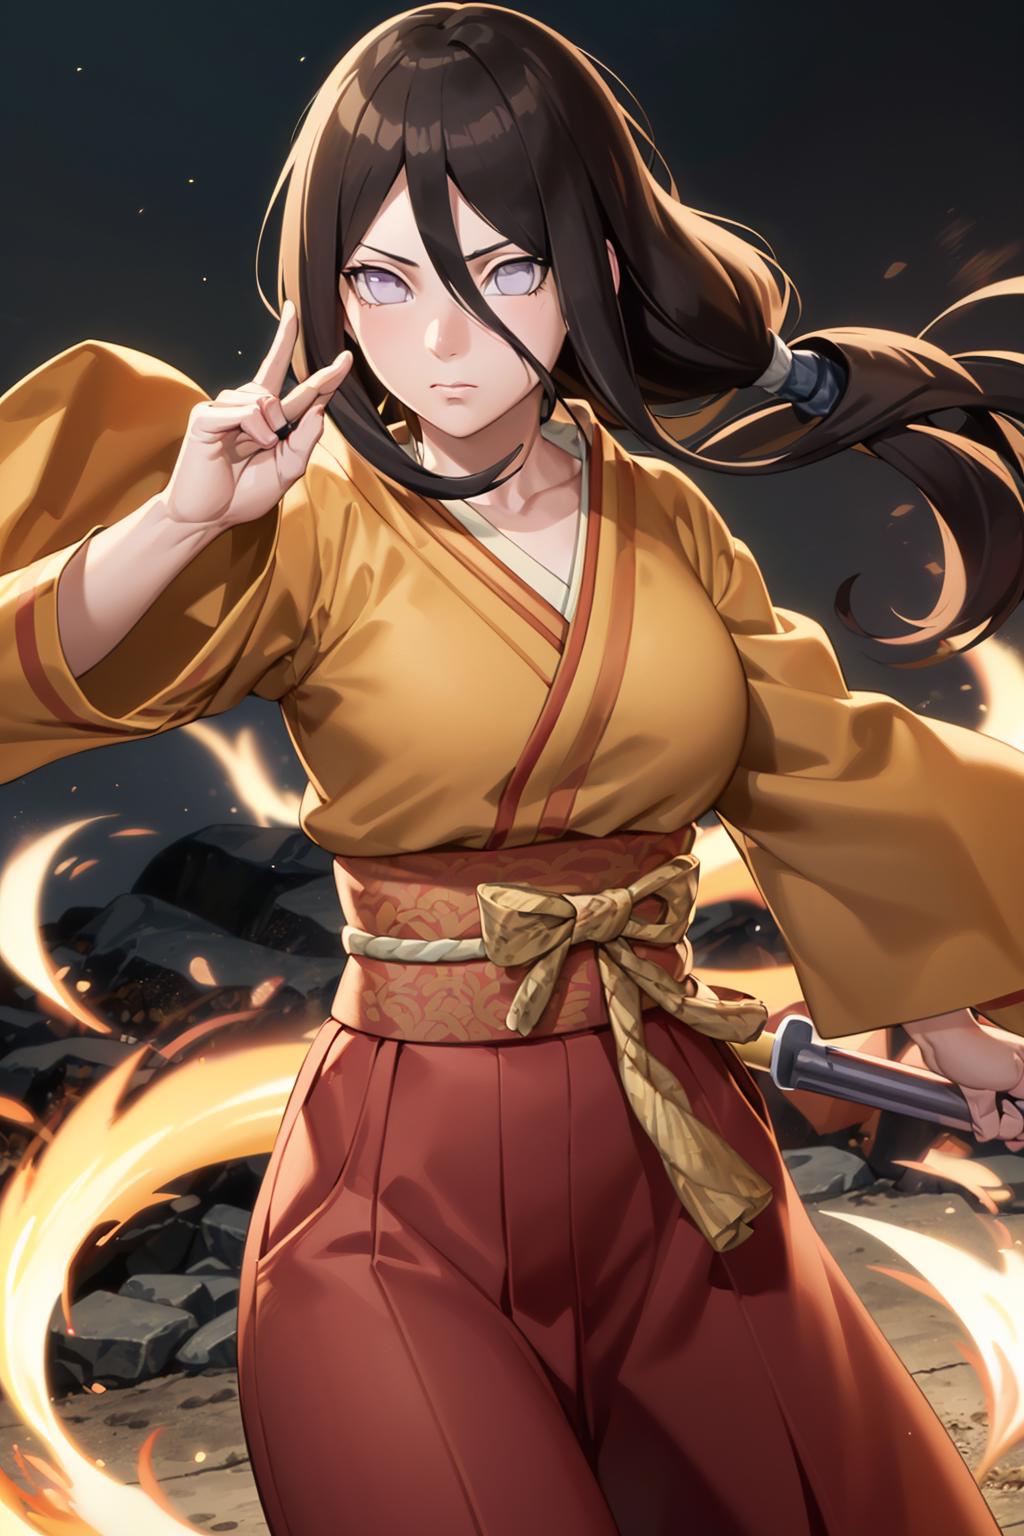 An animated image of a woman in a yellow kimono with a sword in her hand.